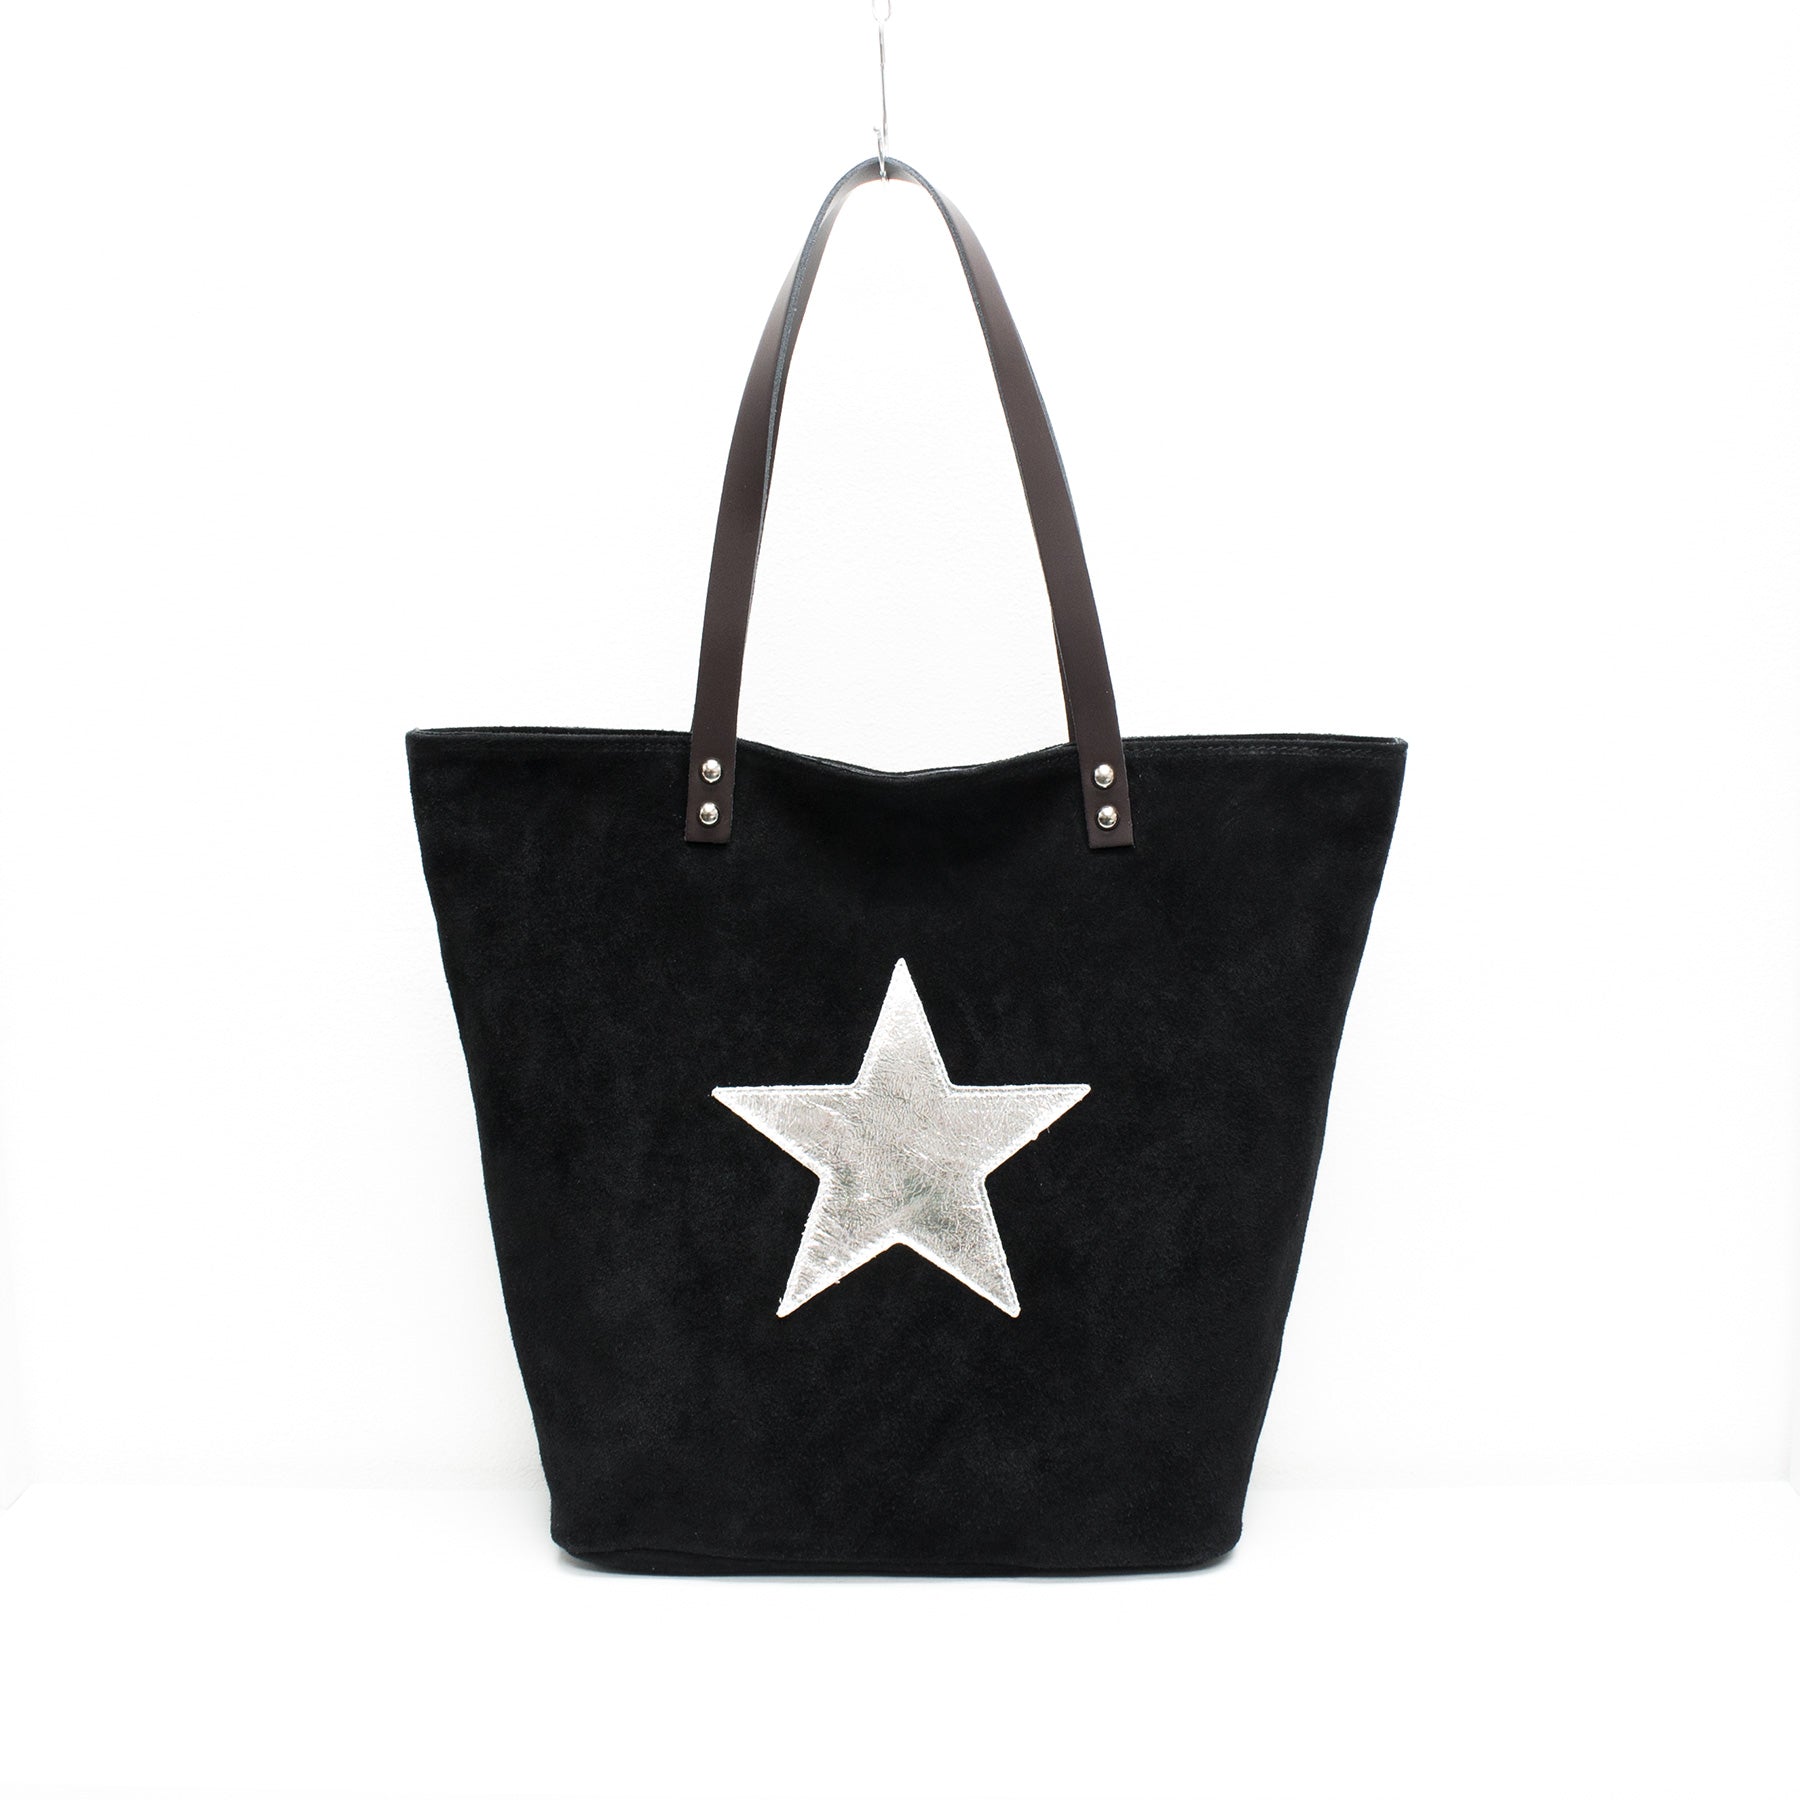 Melissa Suede Leather Star Tote